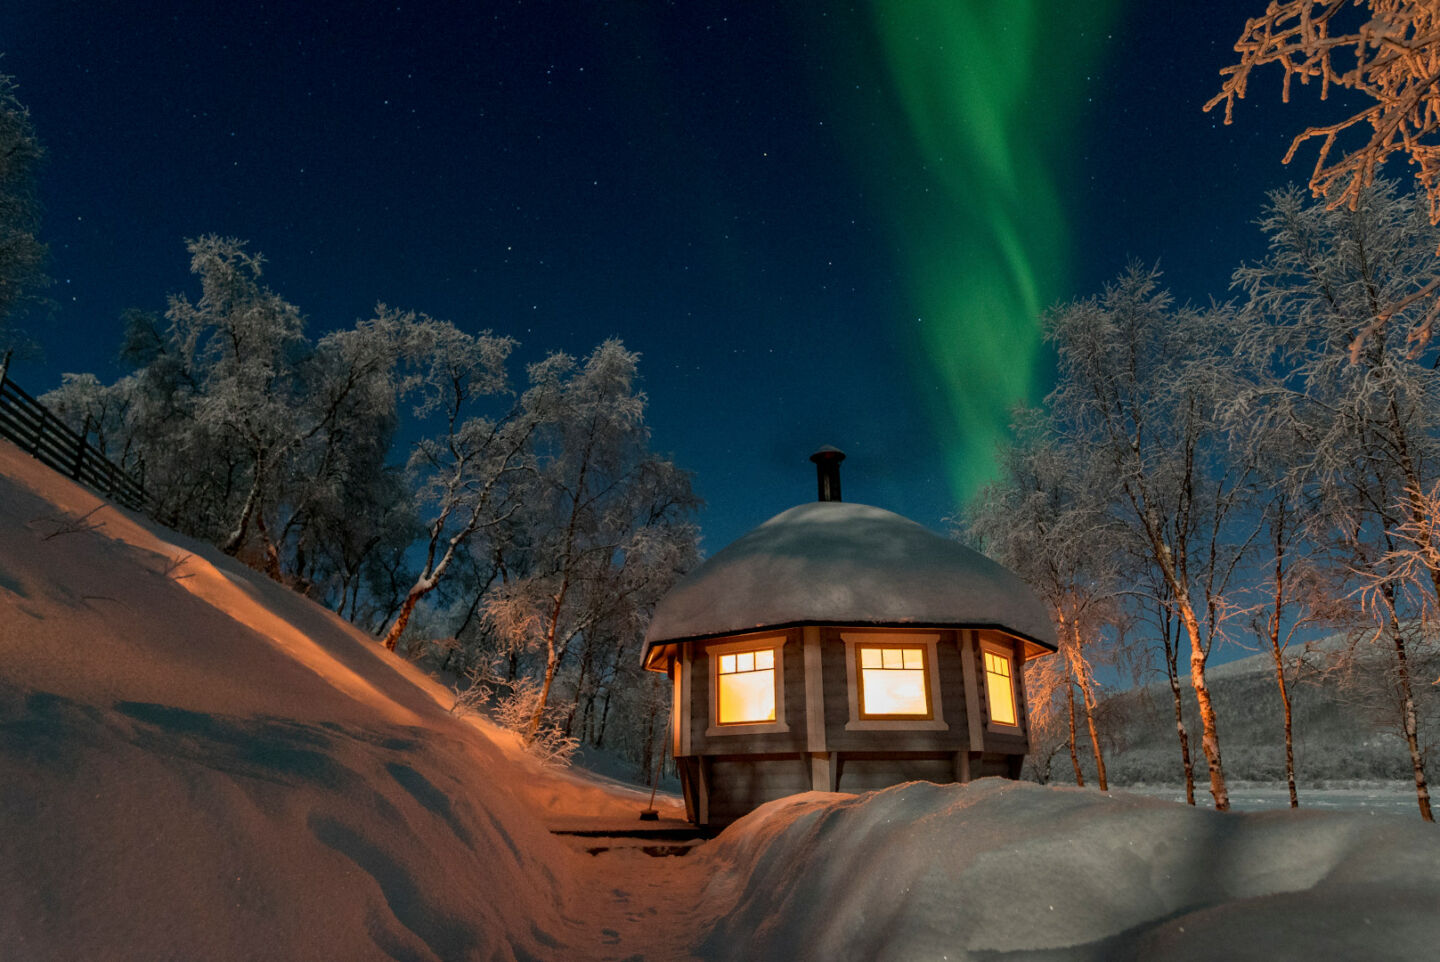 Applying all year round is important when finding a job in Lapland